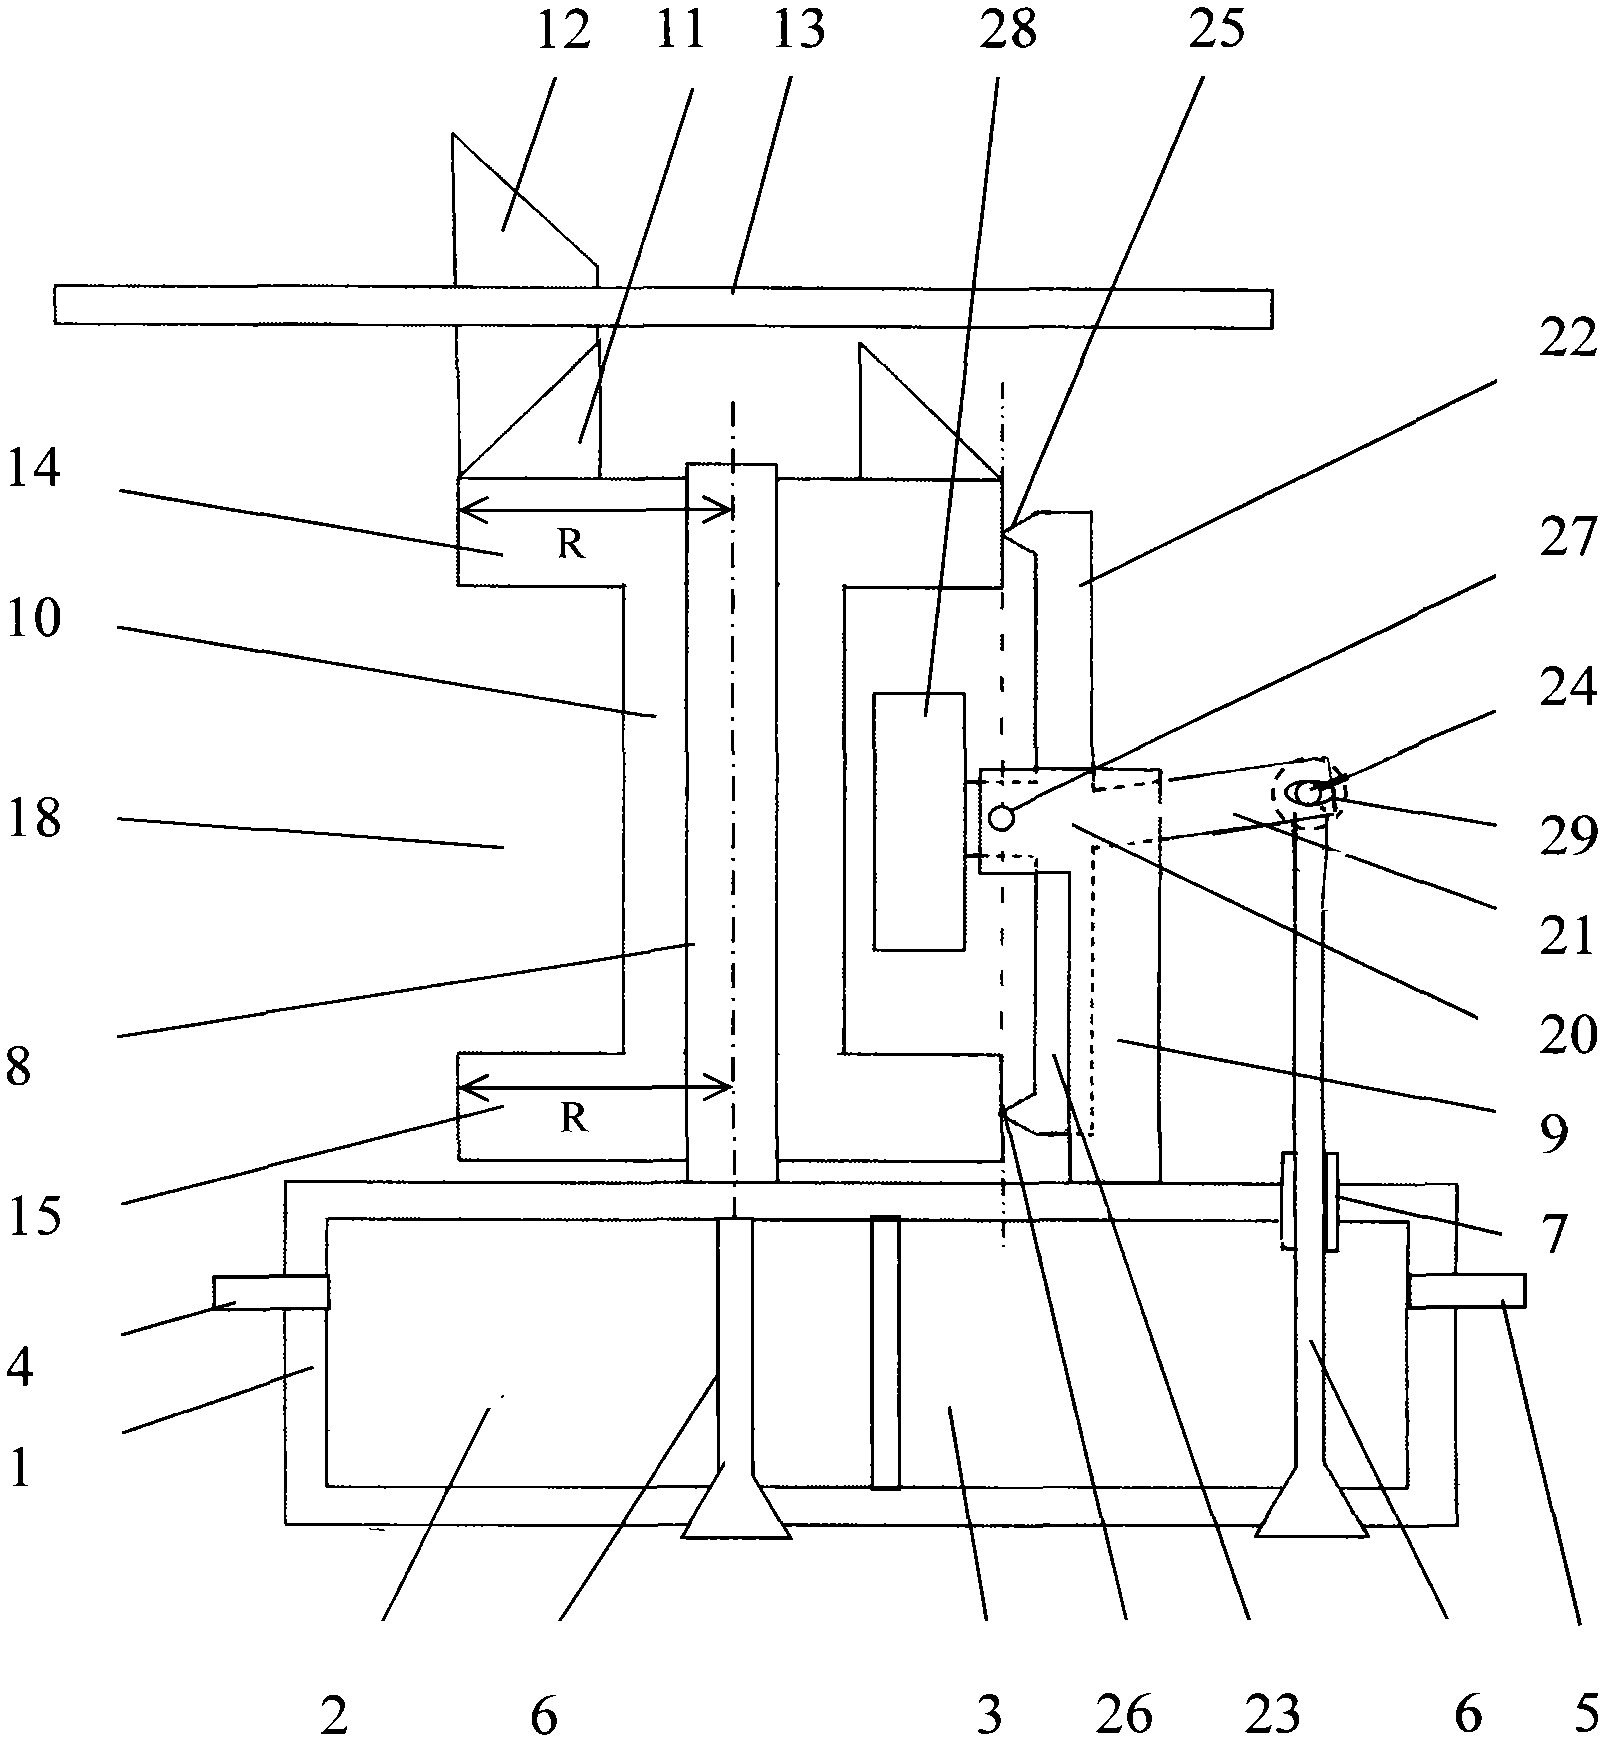 Concave-convex wheel rocker arm type valve distribution mechanism and matched internal combustion engine